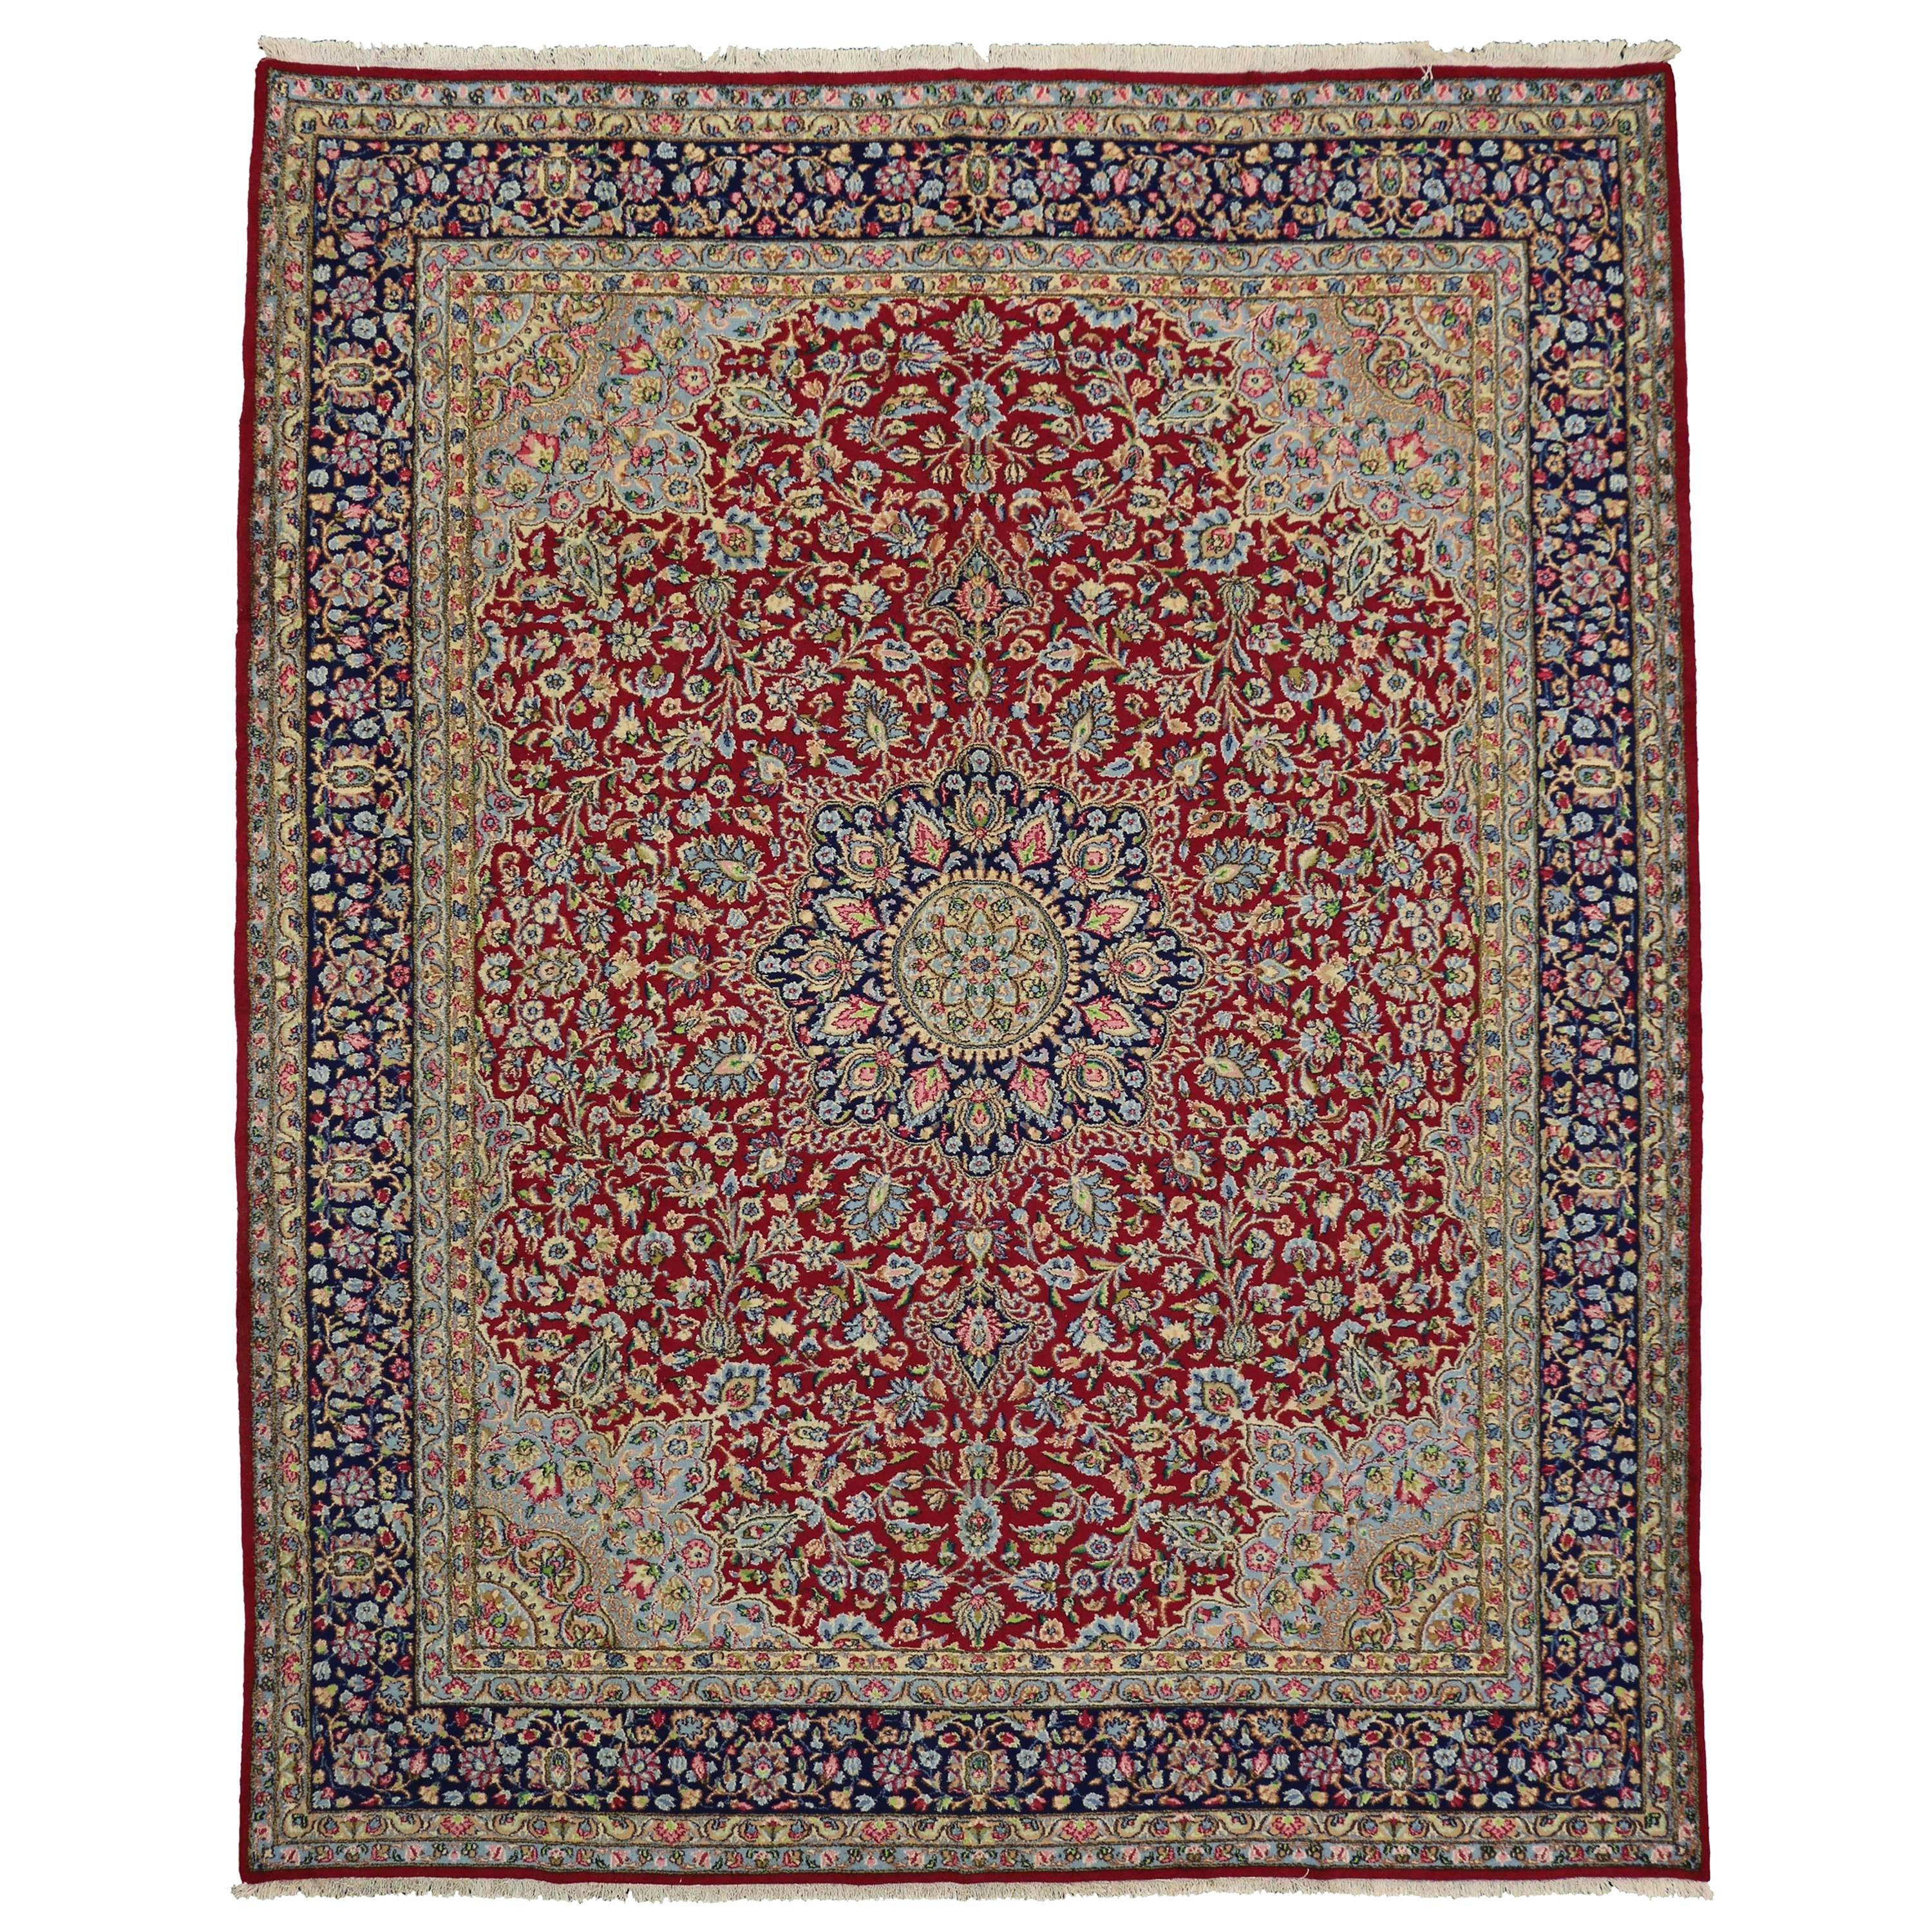 Vintage Persian Kerman Rug with Old World French Victorian Style, Kirman Rug